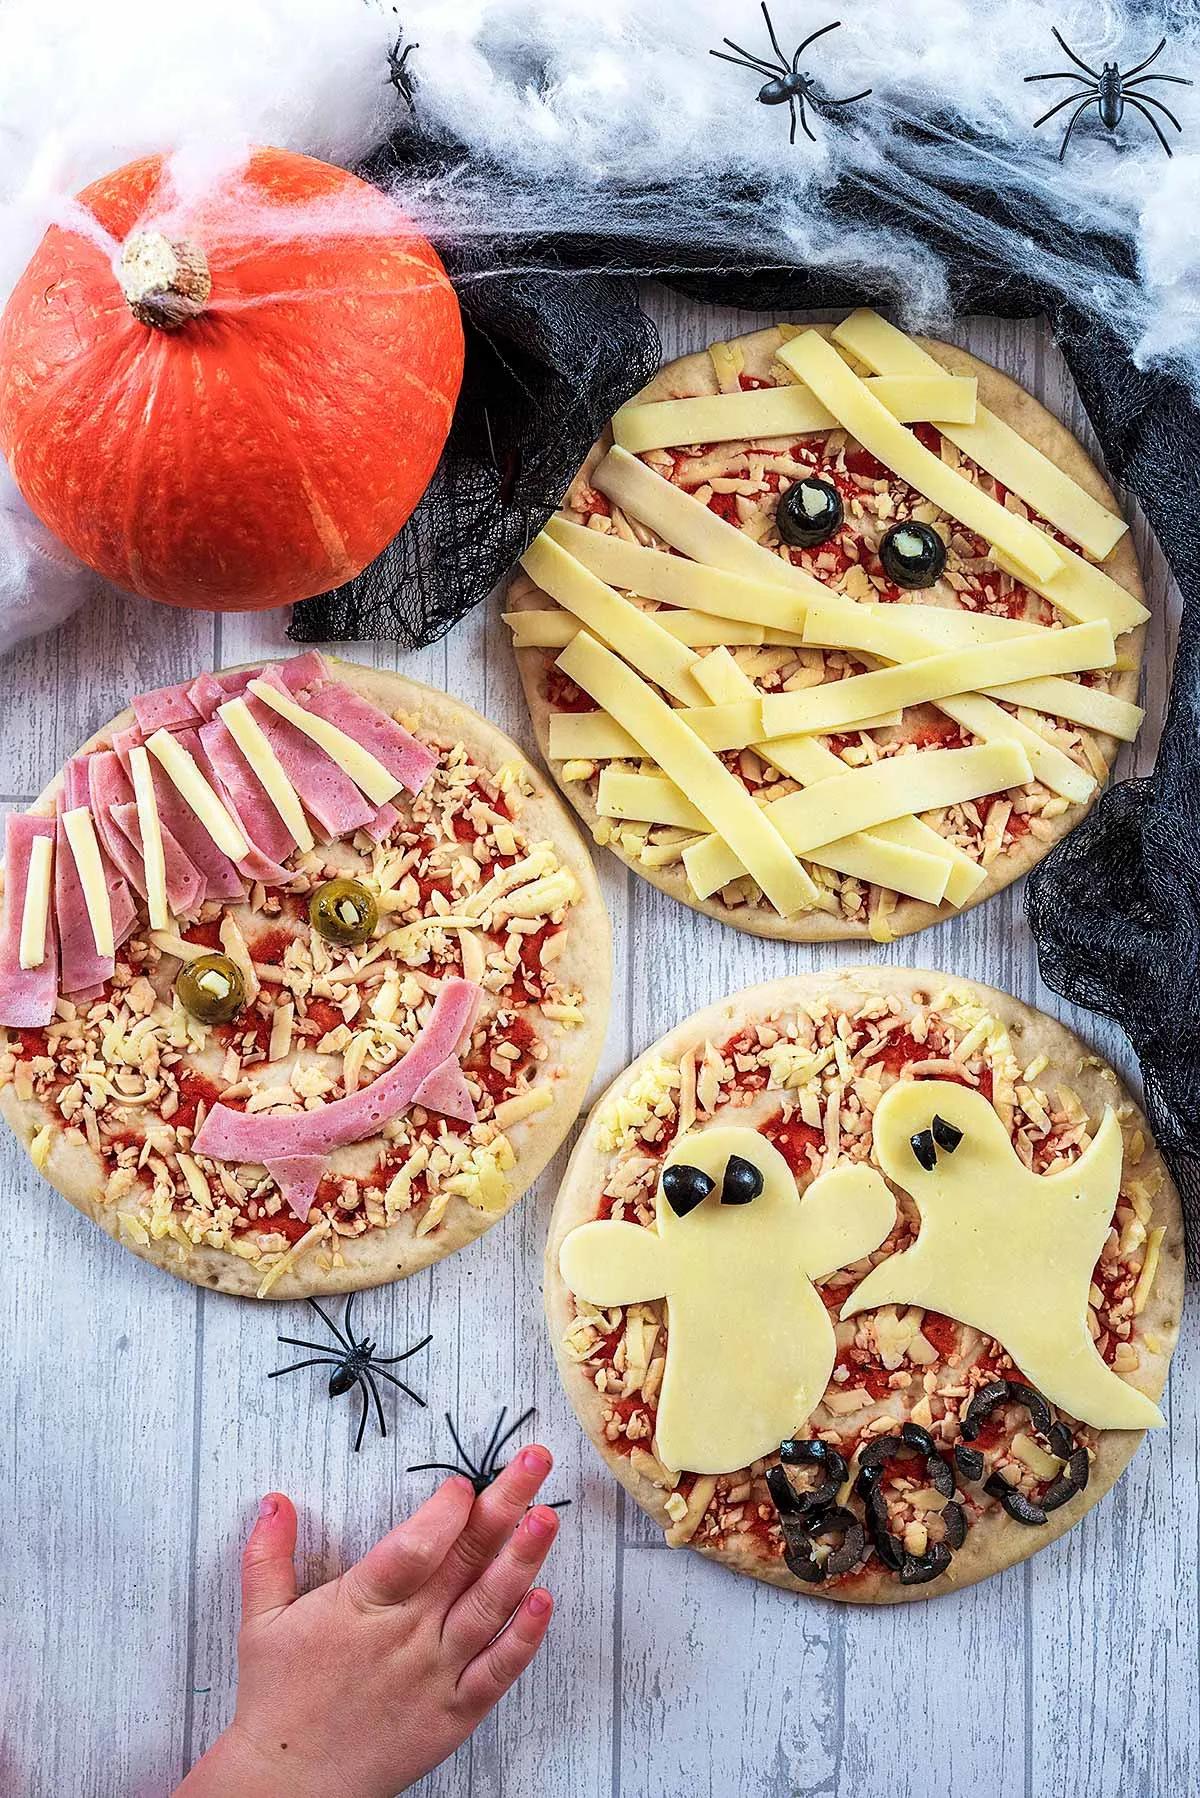 Easy Halloween Pizzas - MyBigLife.com Weight Loss And Lifestyle Portal